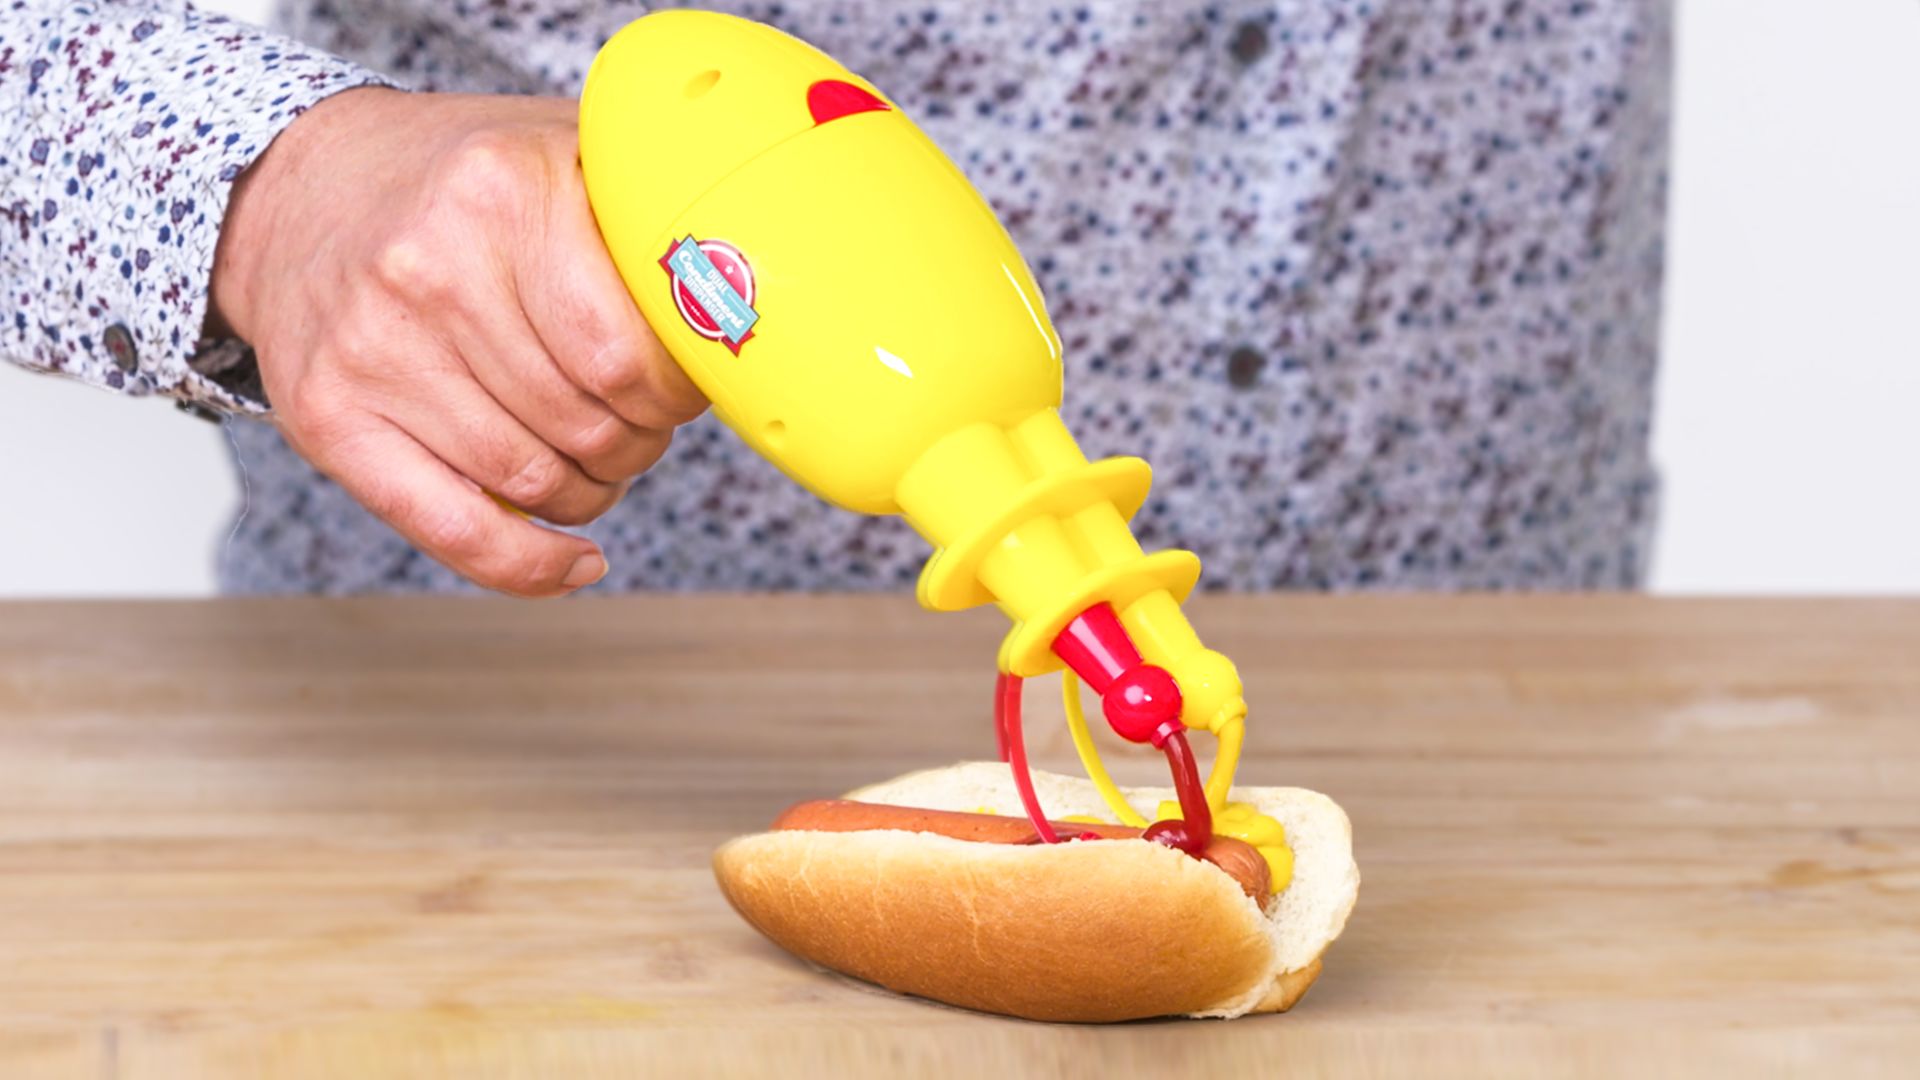 Watch 5 Cheese Gadgets Tested by Design Expert